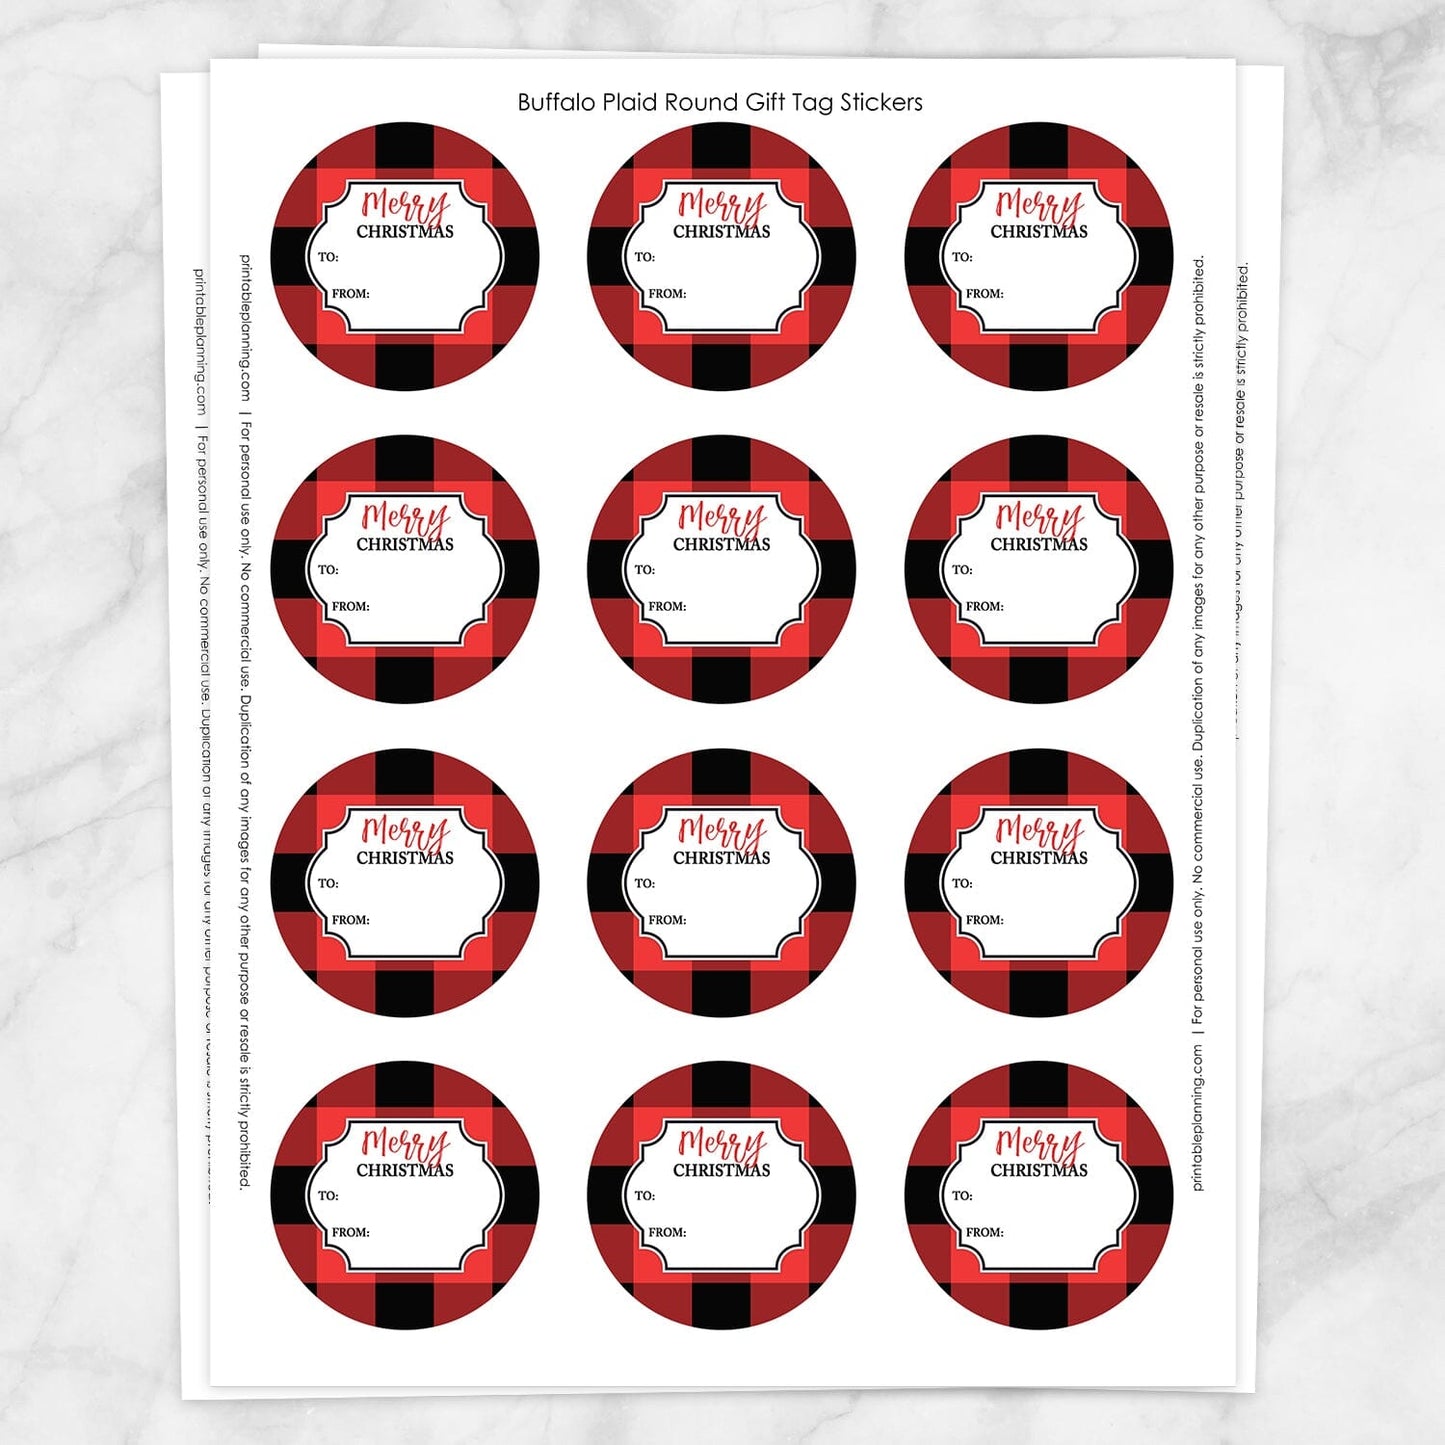 Printable Red Buffalo Plaid Gift Tag Stickers at Printable Planning. Sheet of 12 stickers.